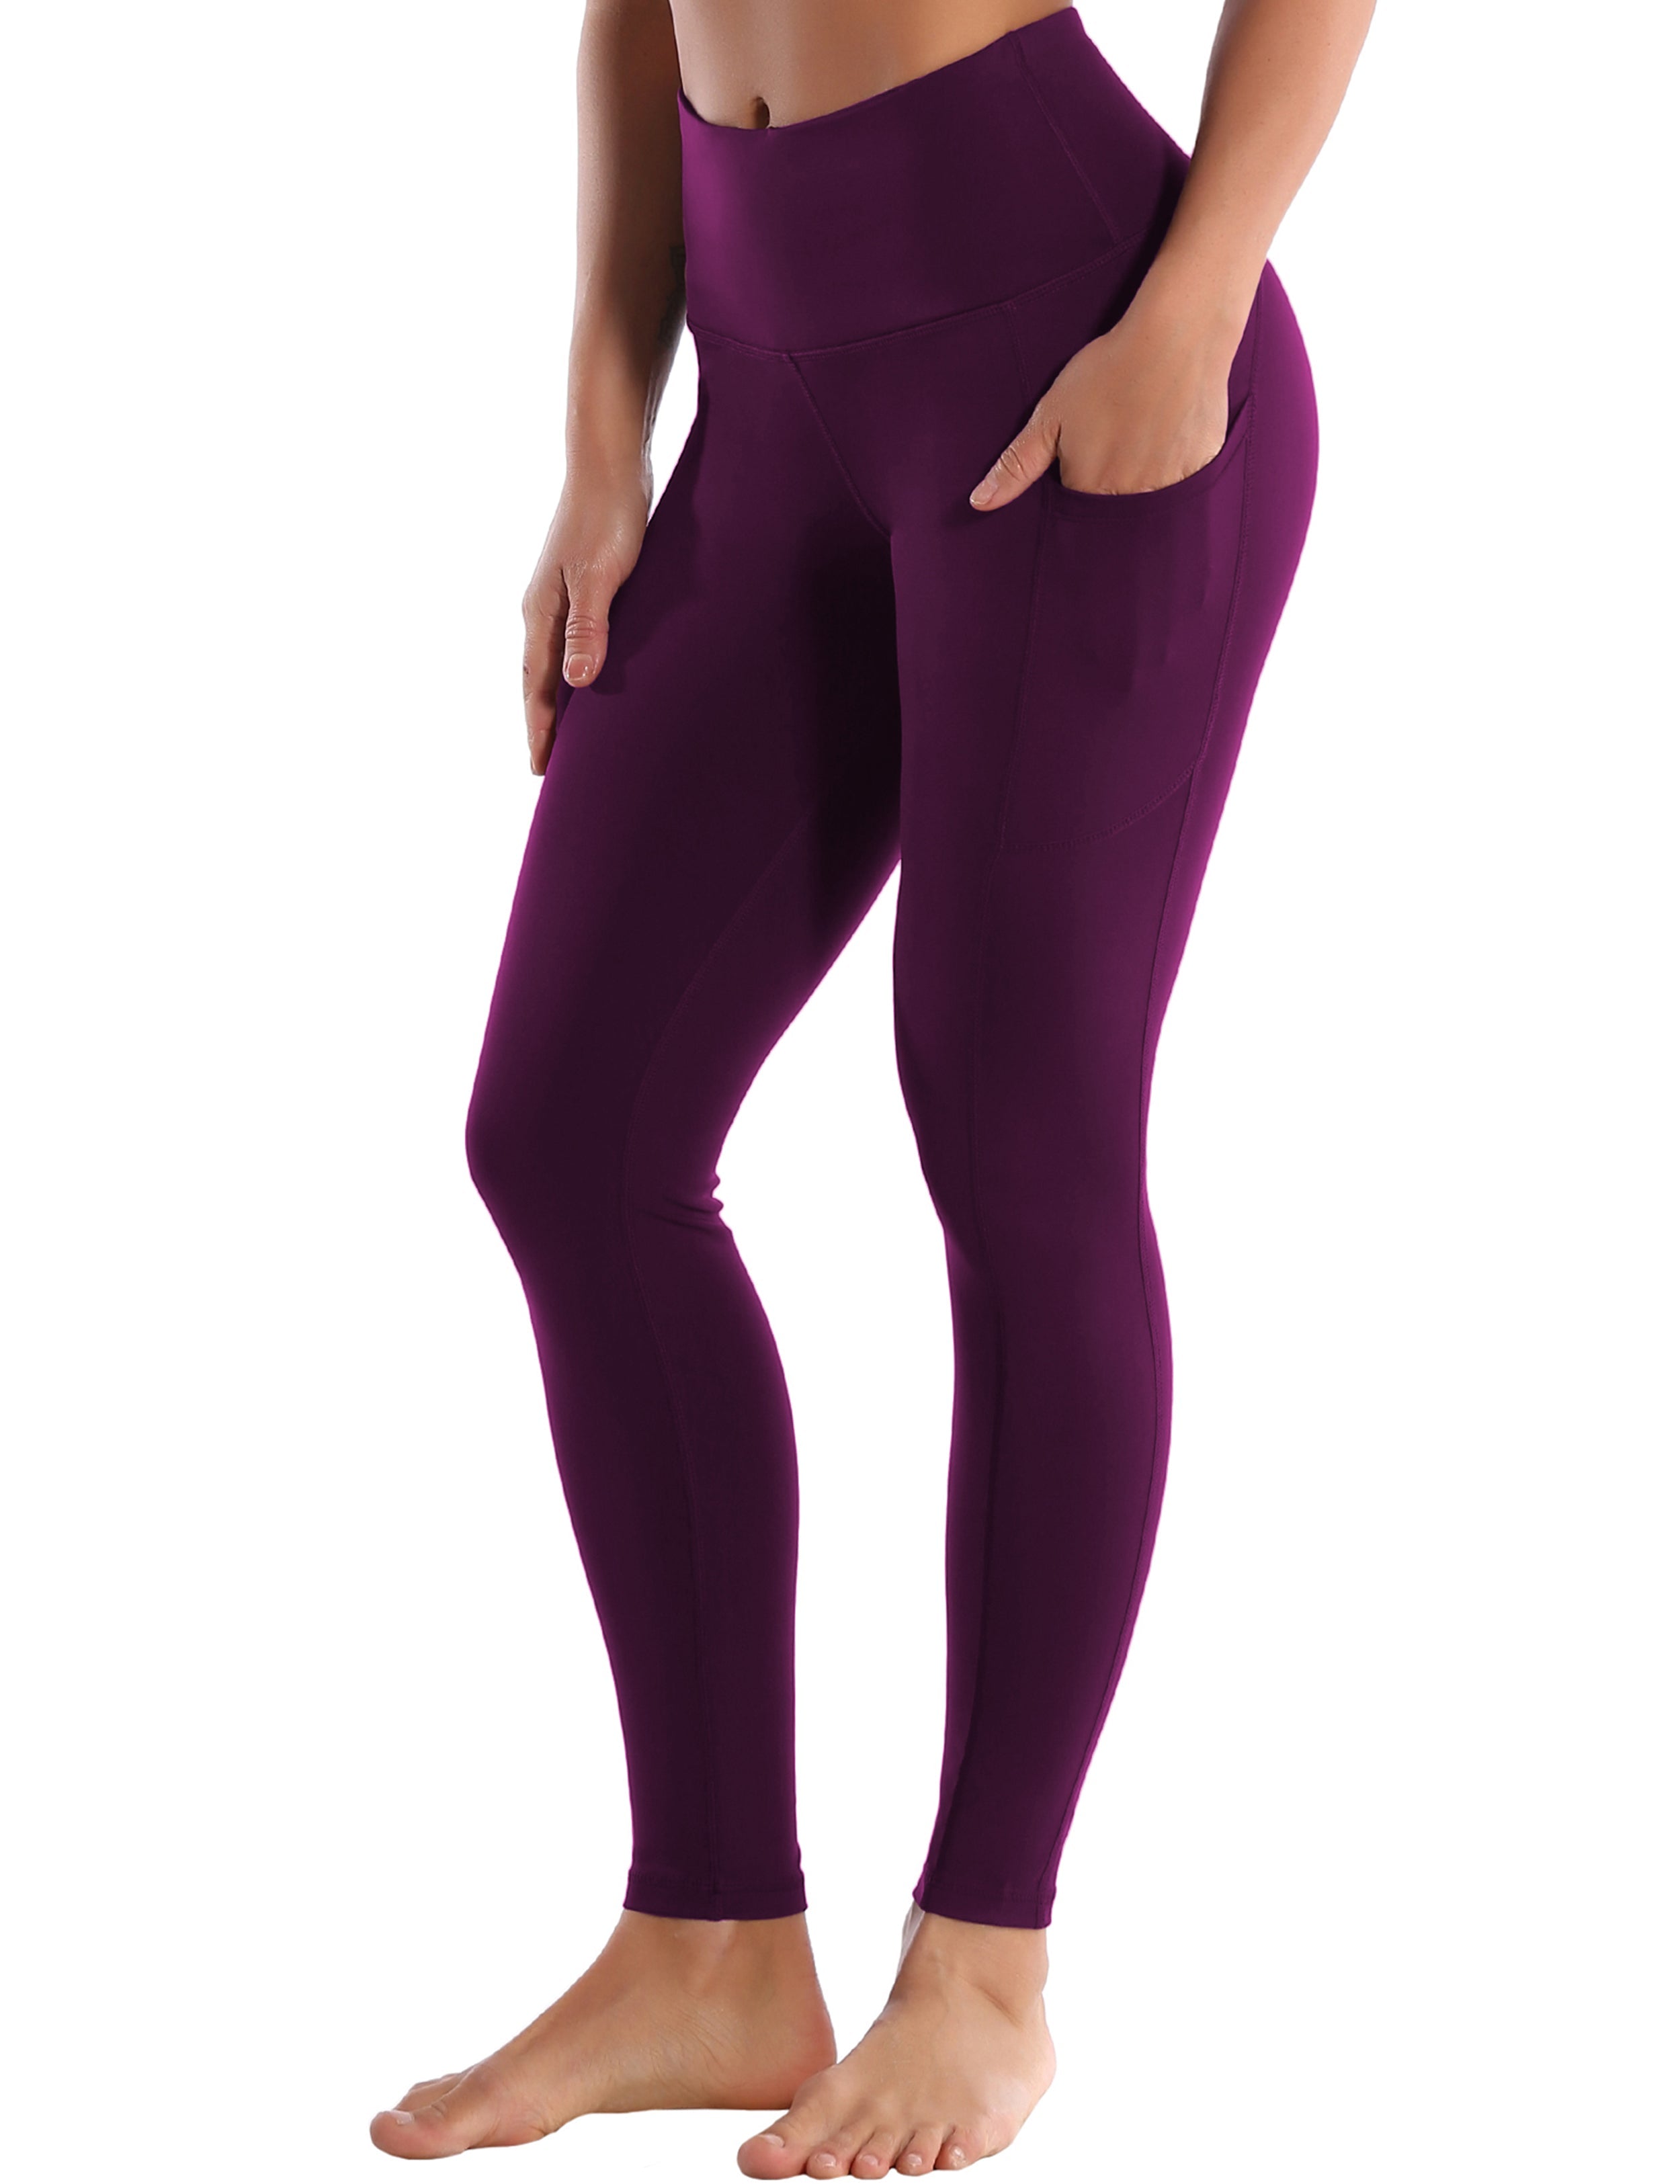 Hip Line Side Pockets Pilates Pants grapevine Sexy Hip Line Side Pockets 75%Nylon/25%Spandex Fabric doesn't attract lint easily 4-way stretch No see-through Moisture-wicking Tummy control Inner pocket Two lengths